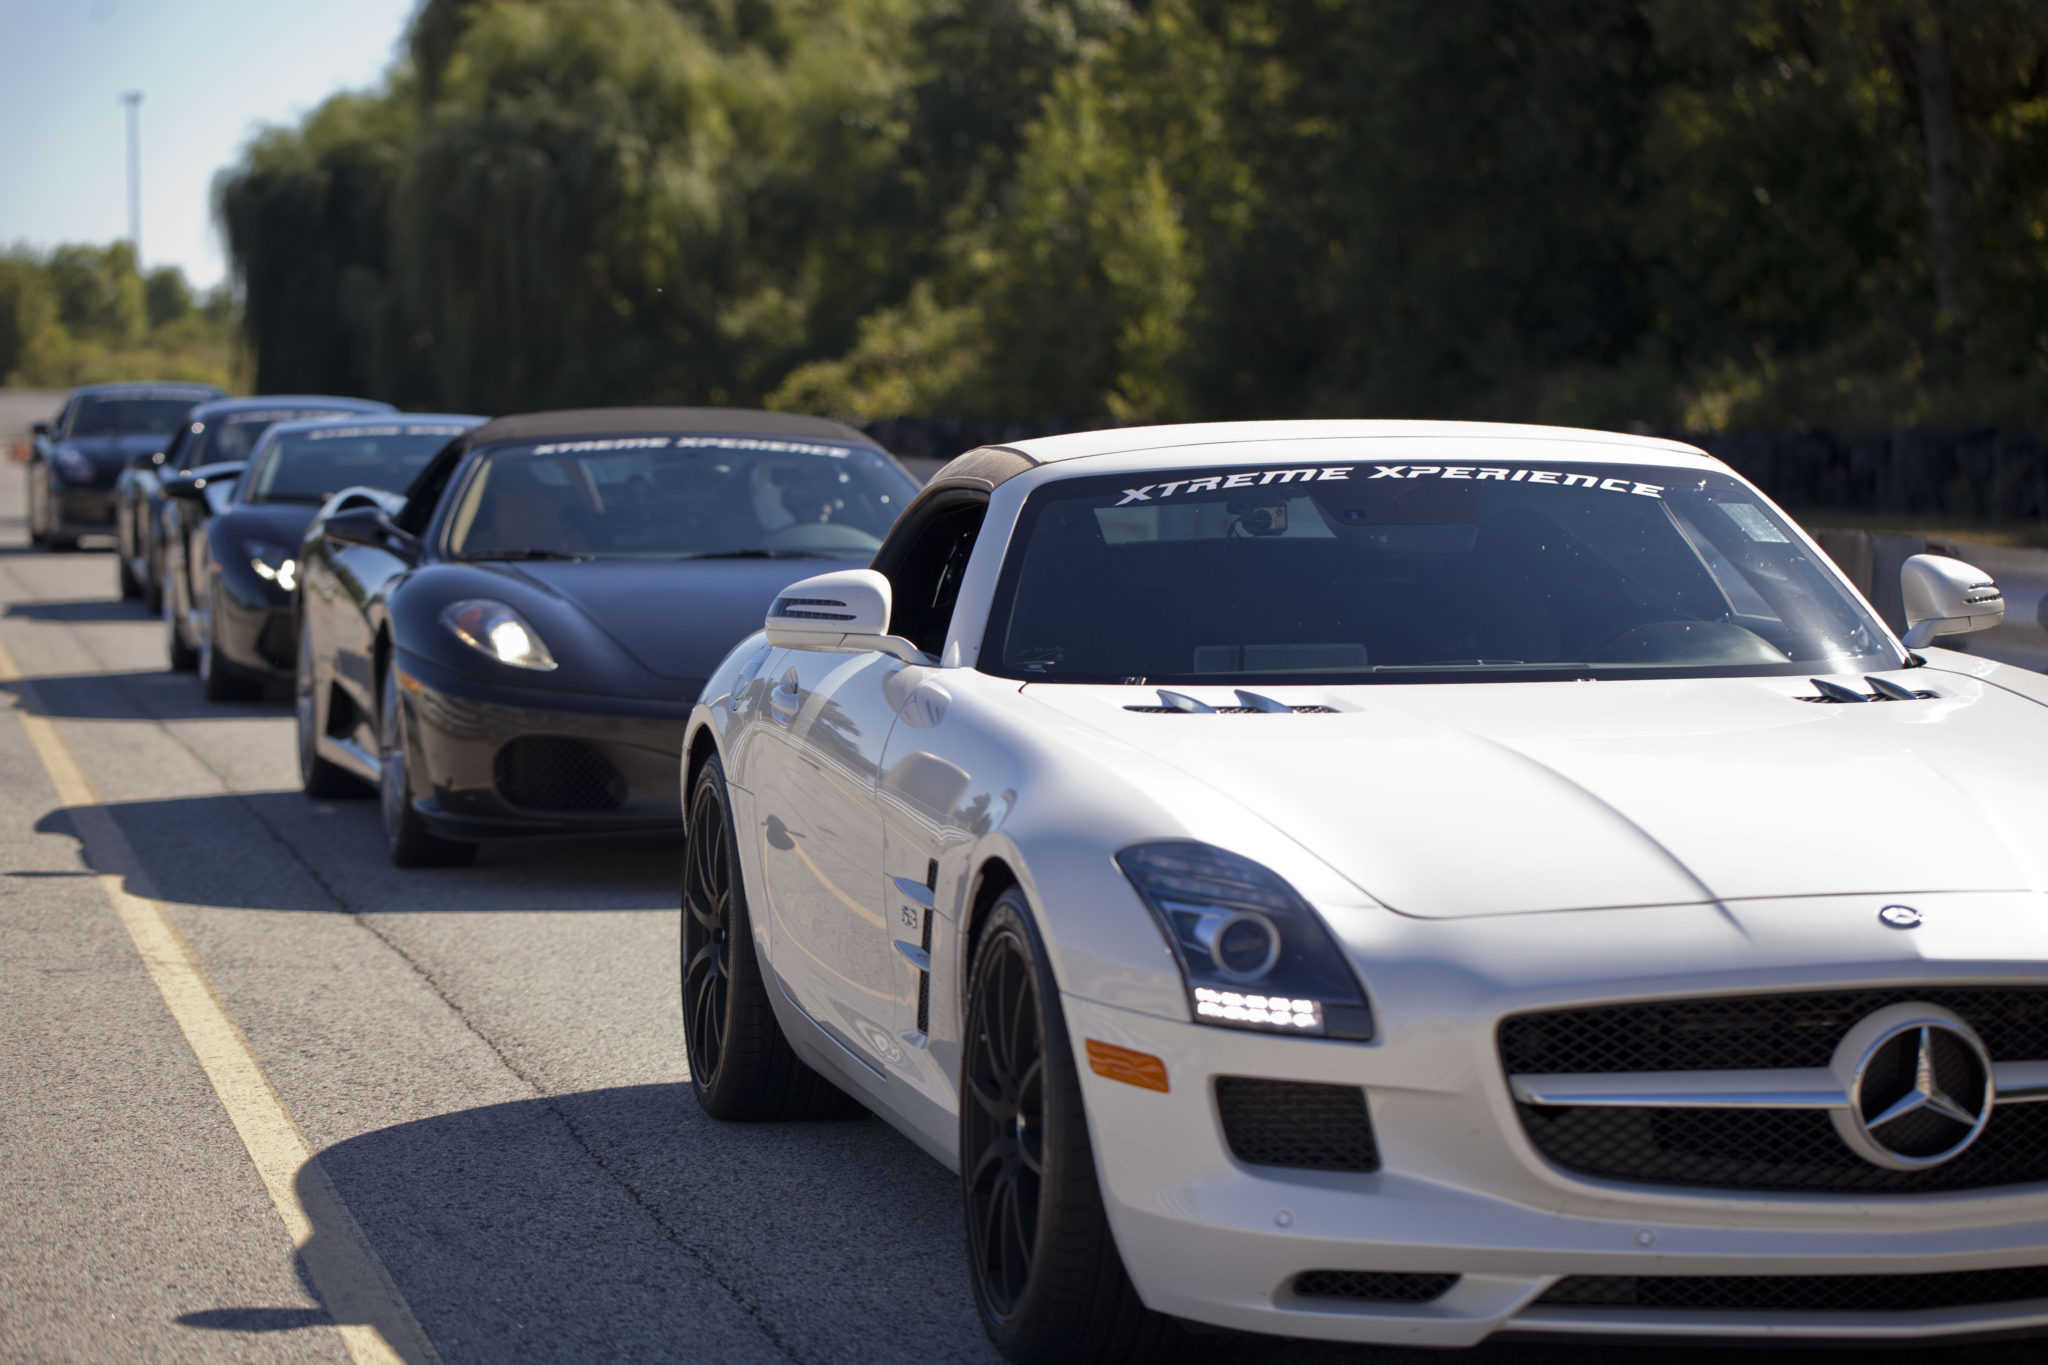 Drive a supercar on a racetrack with Xtreme Xperience